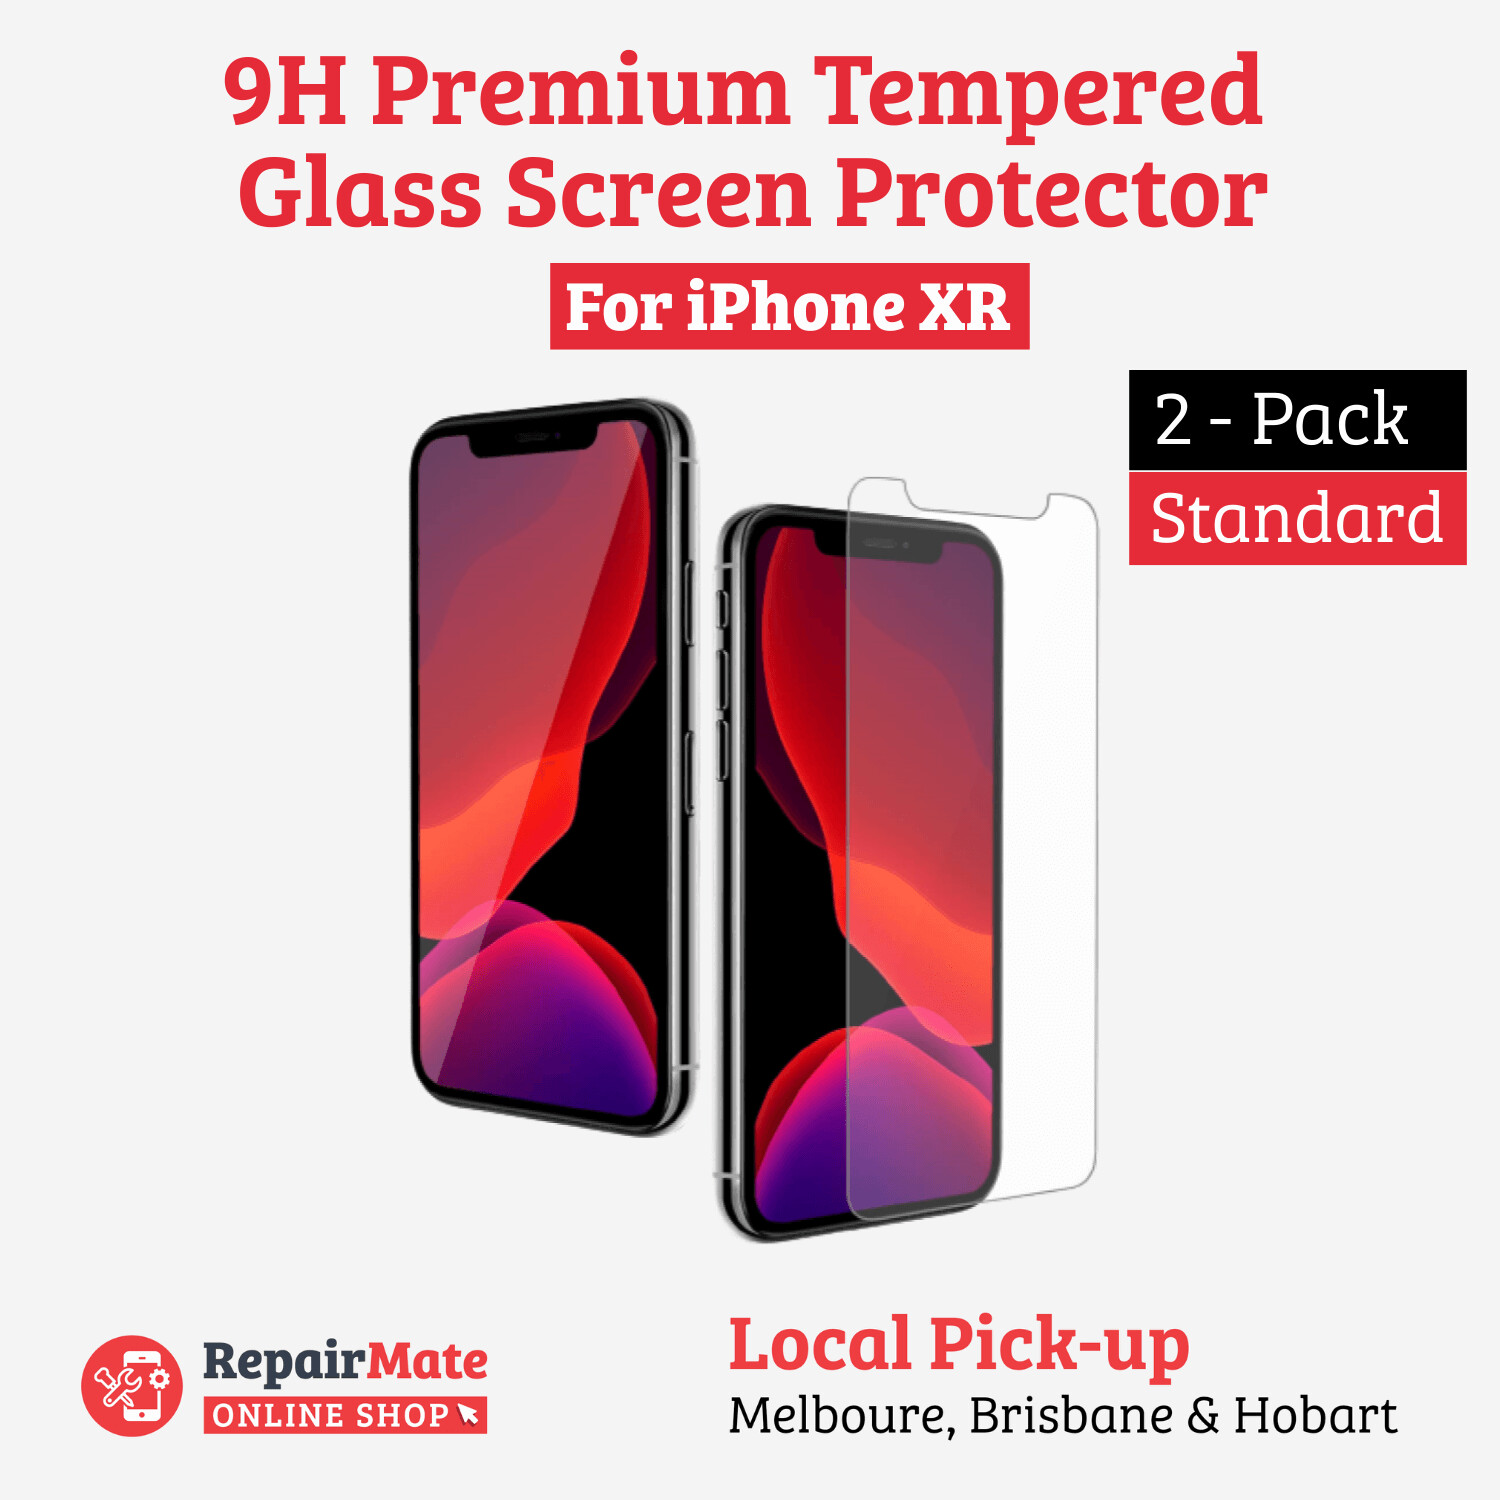 iPhone XR 9H Premium Tempered Glass Screen Protector [2 Pack]